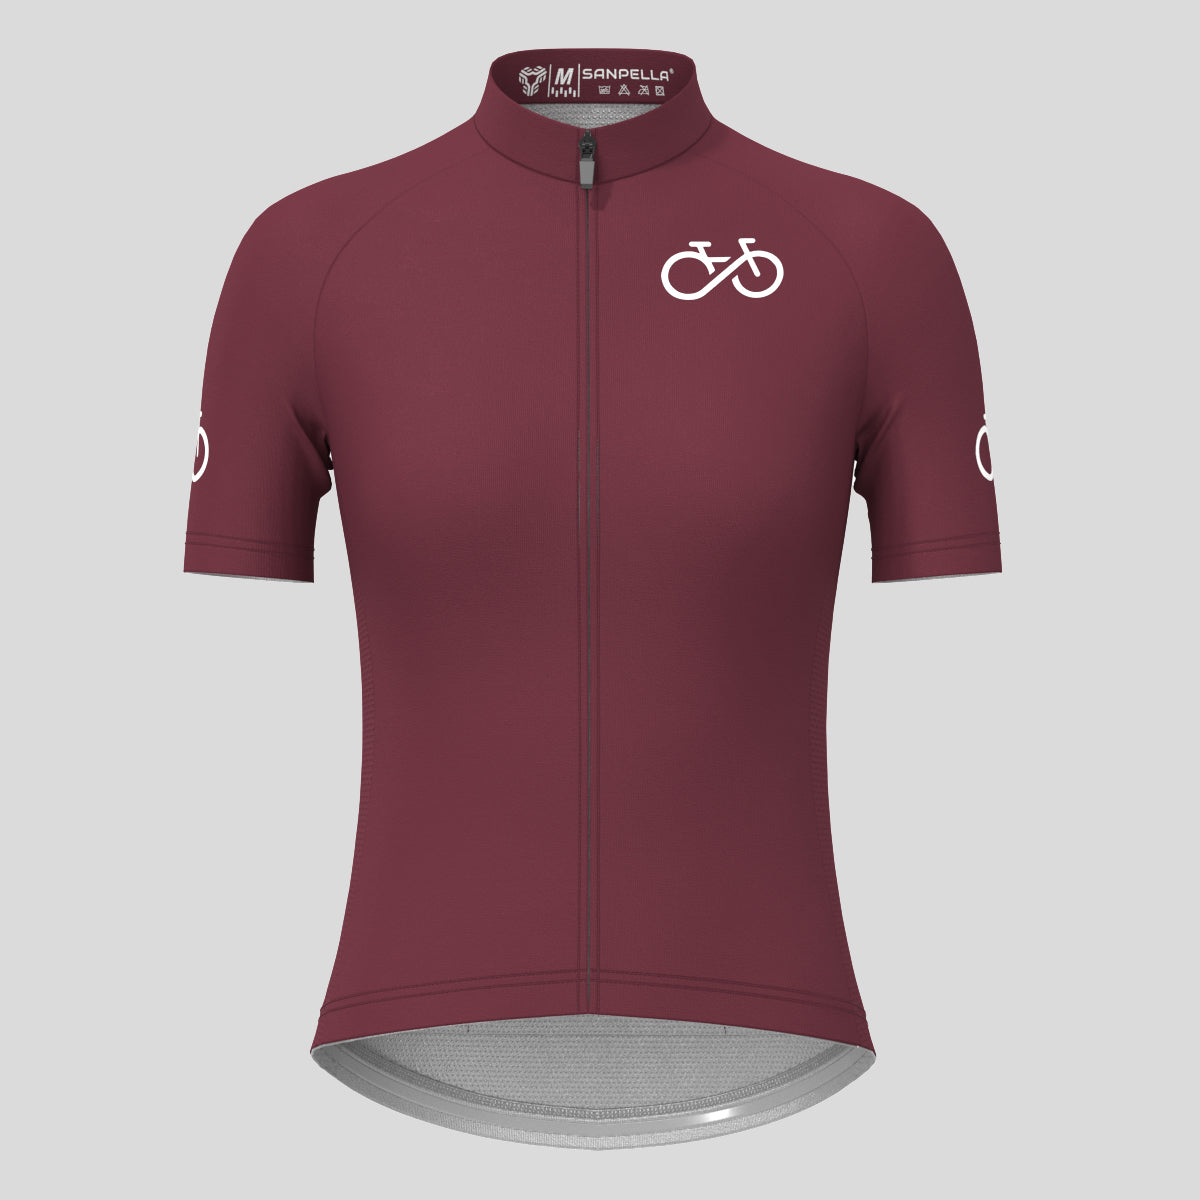 Ride Forever Women's Cycling Jersey - Plum